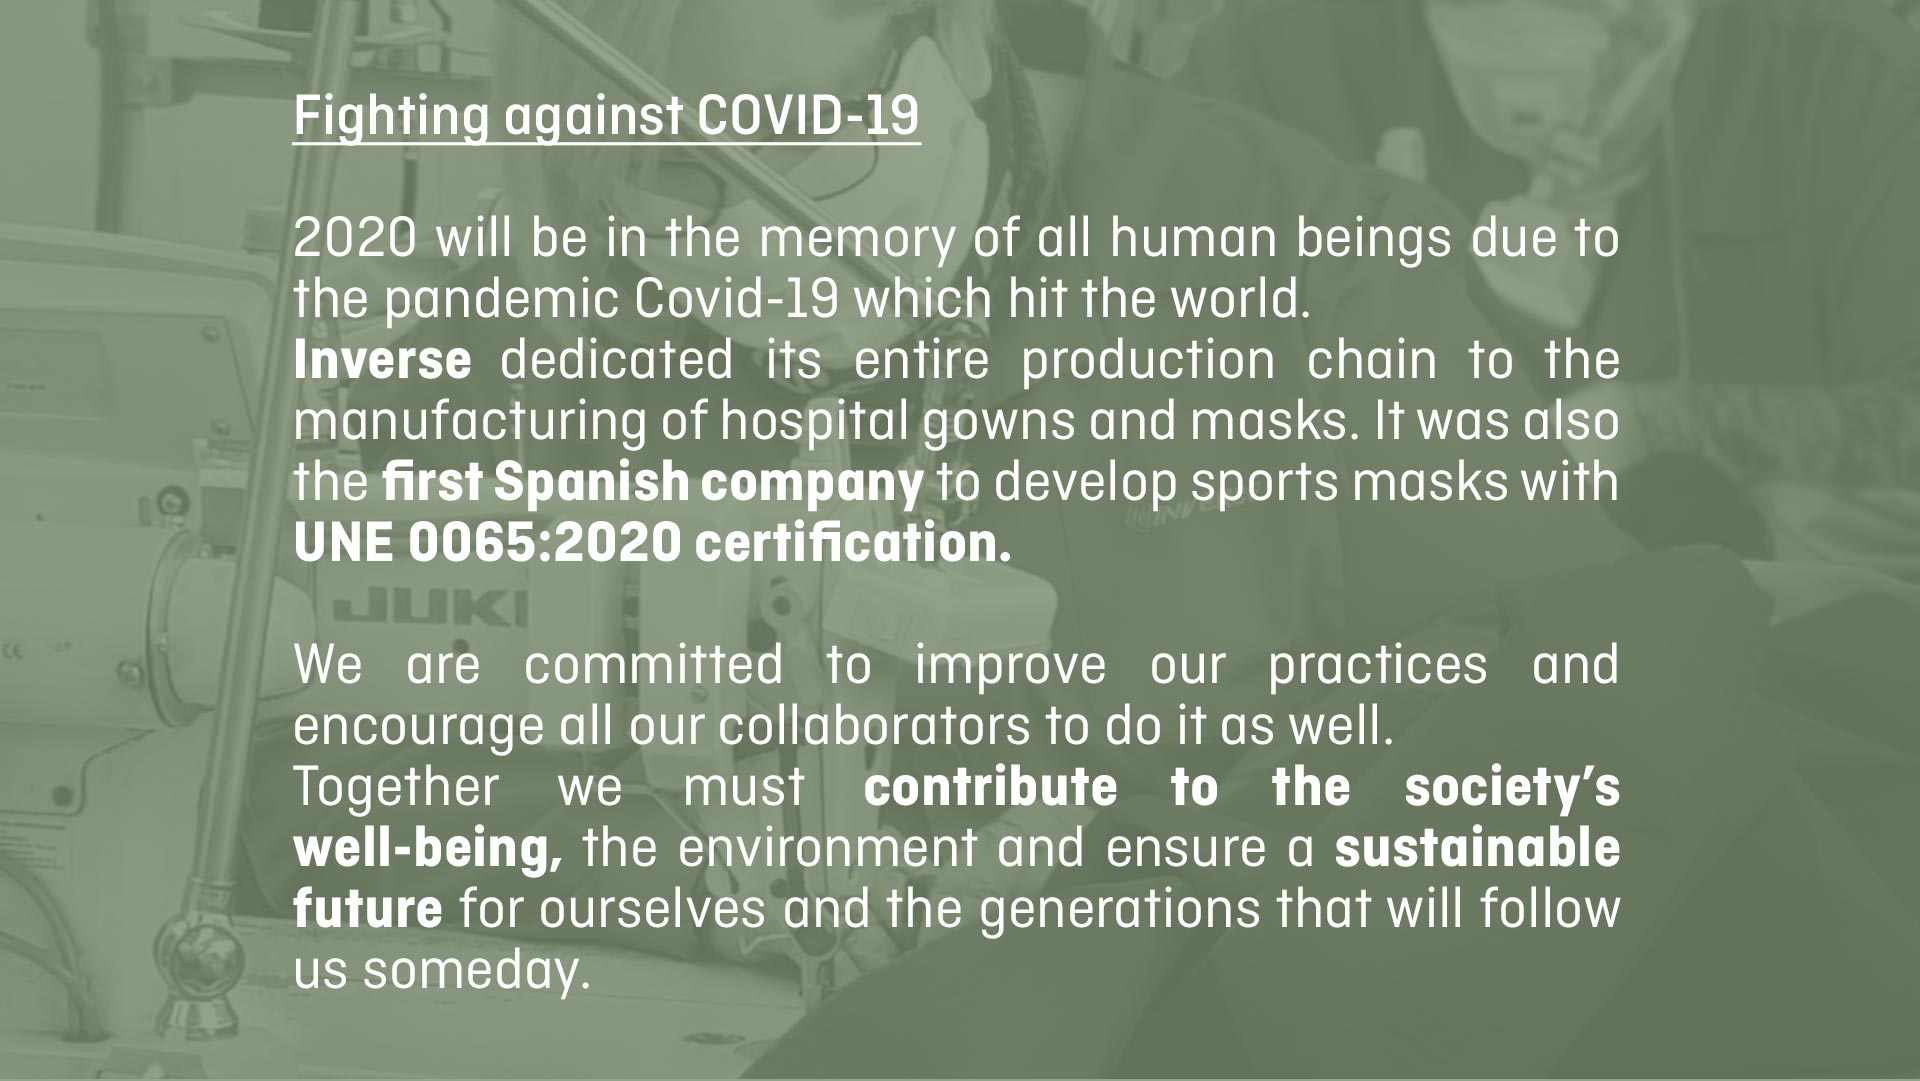 Inverse was also the first Spanish company to develop sports masks with UNE 0065:2020 certification.